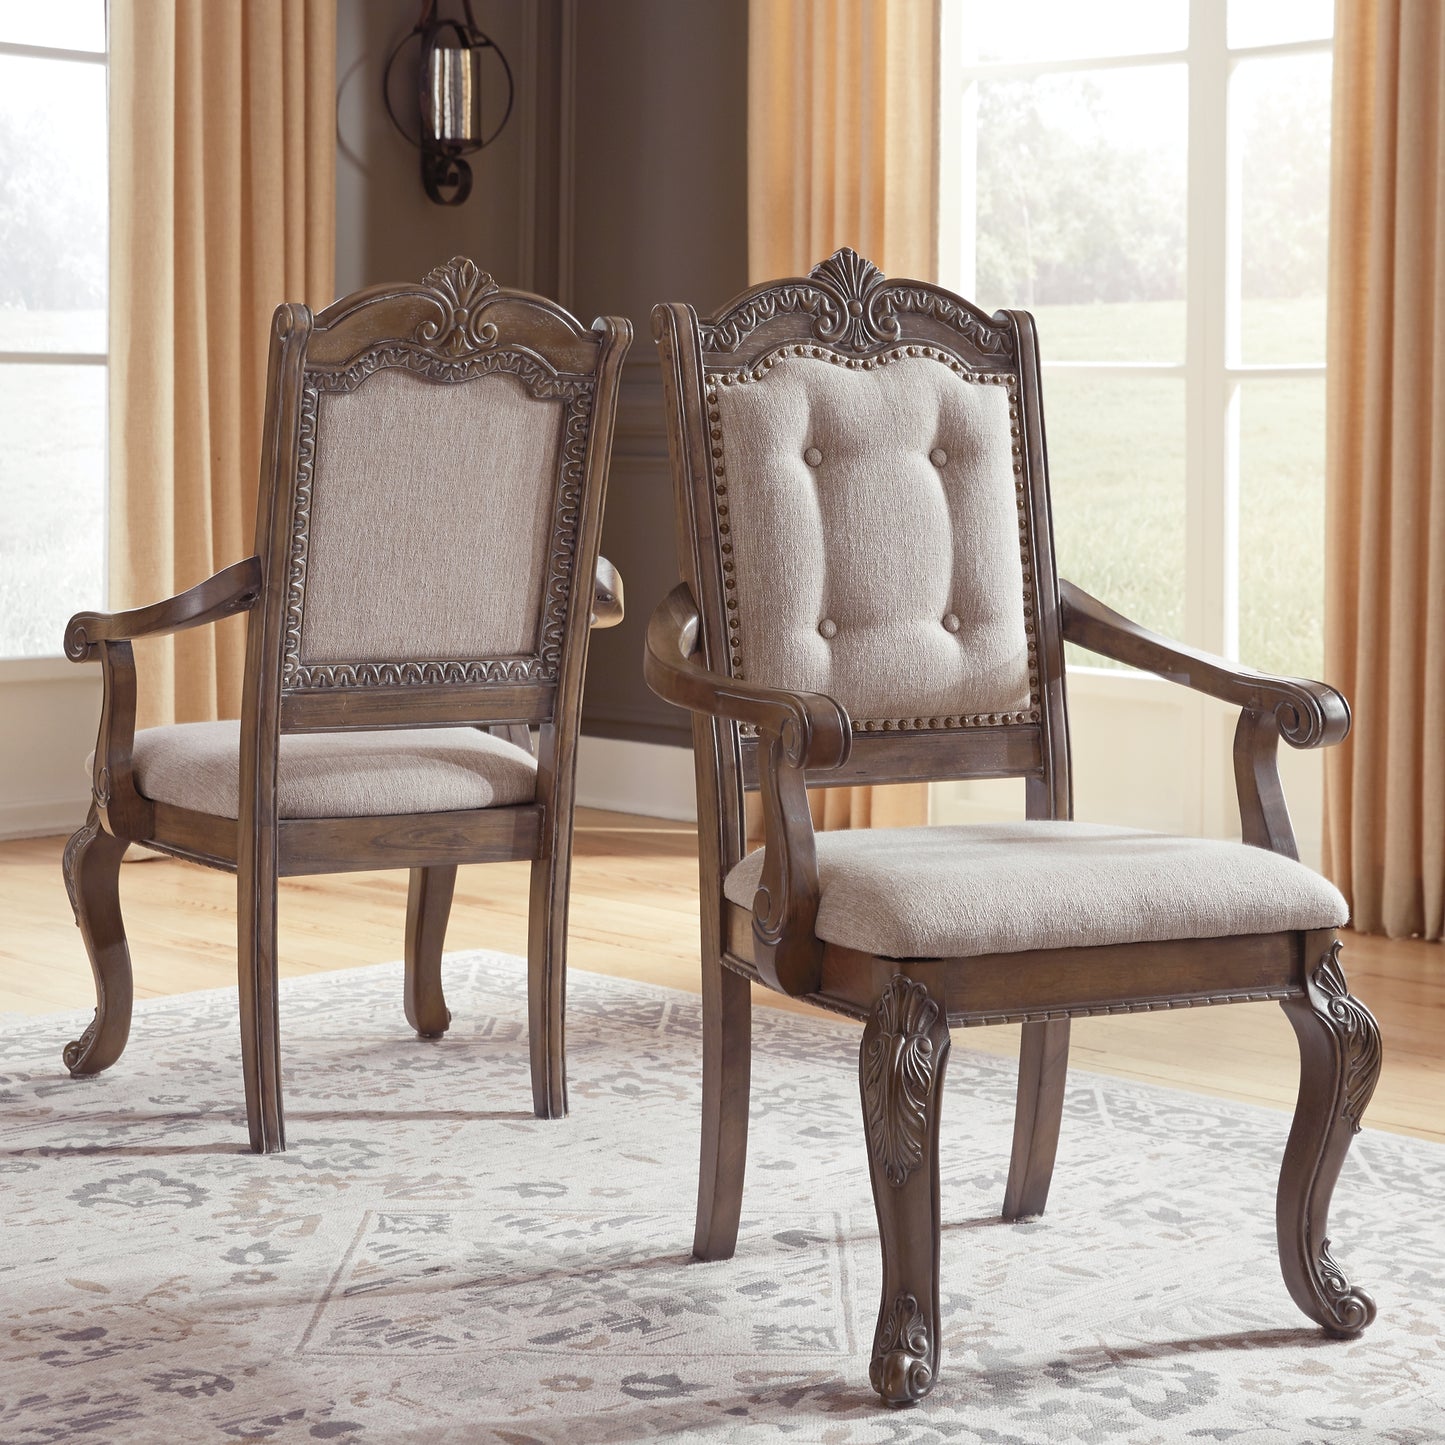 Charmond Dining Chair (Set of 2)